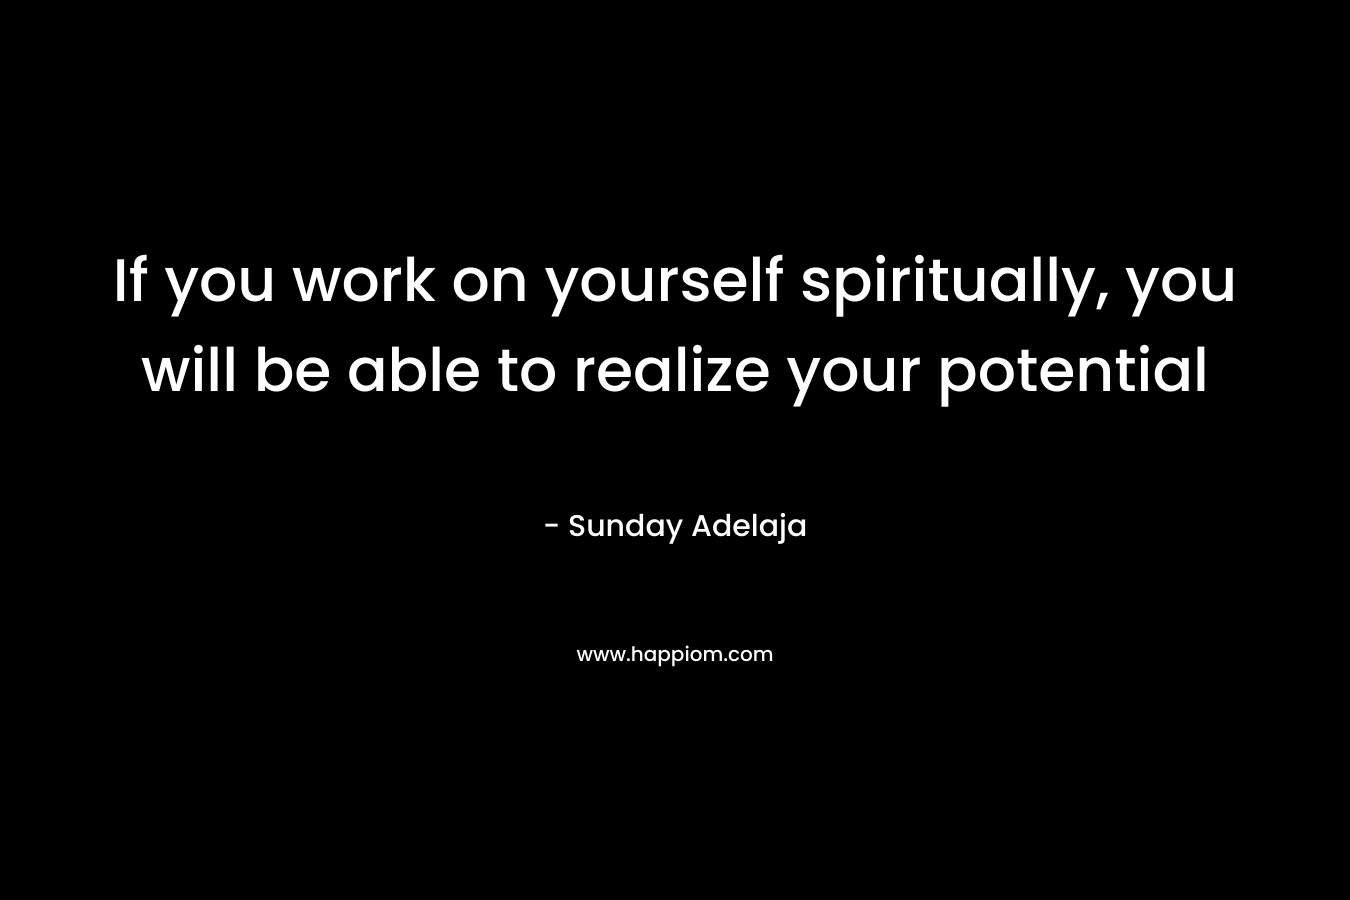 If you work on yourself spiritually, you will be able to realize your potential